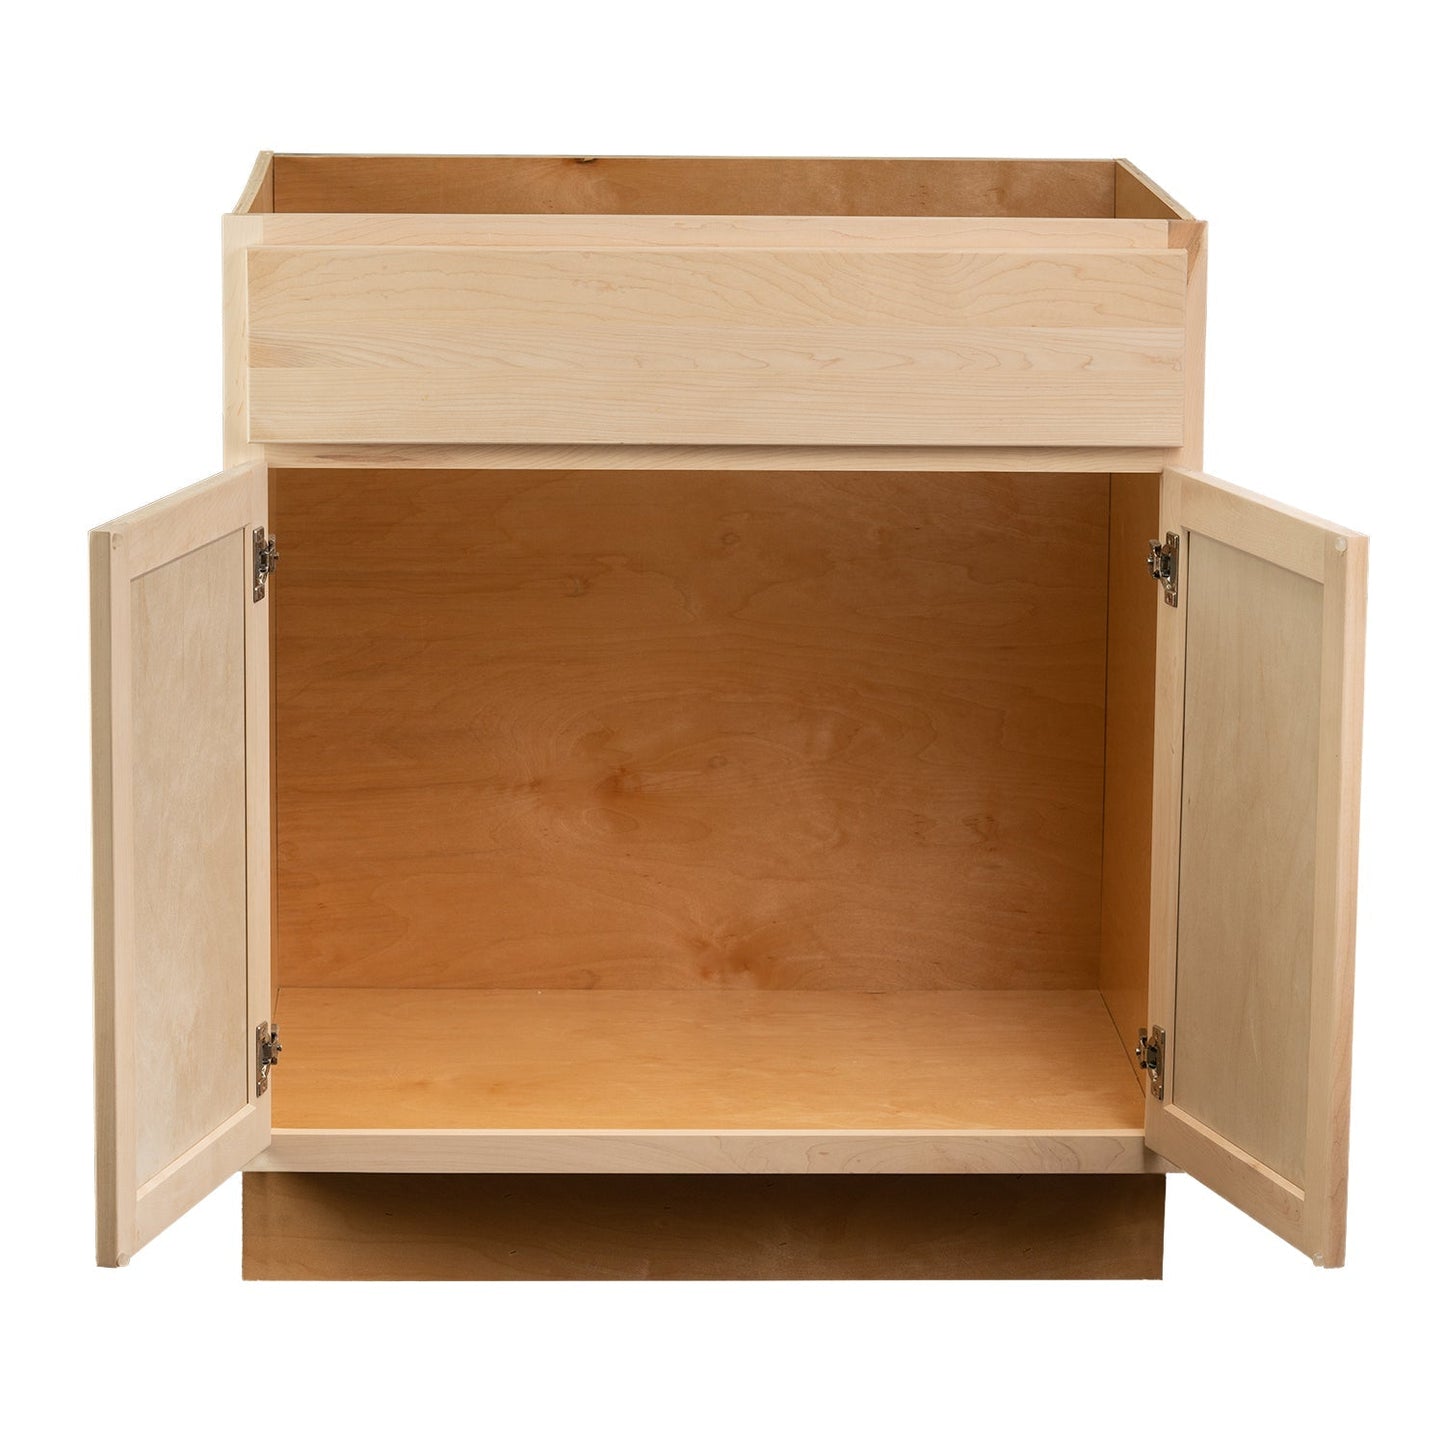 Quicklock RTA (Ready-to-Assemble) Raw Maple Vanity Base Cabinet | 30"Wx34.5"Hx18"D